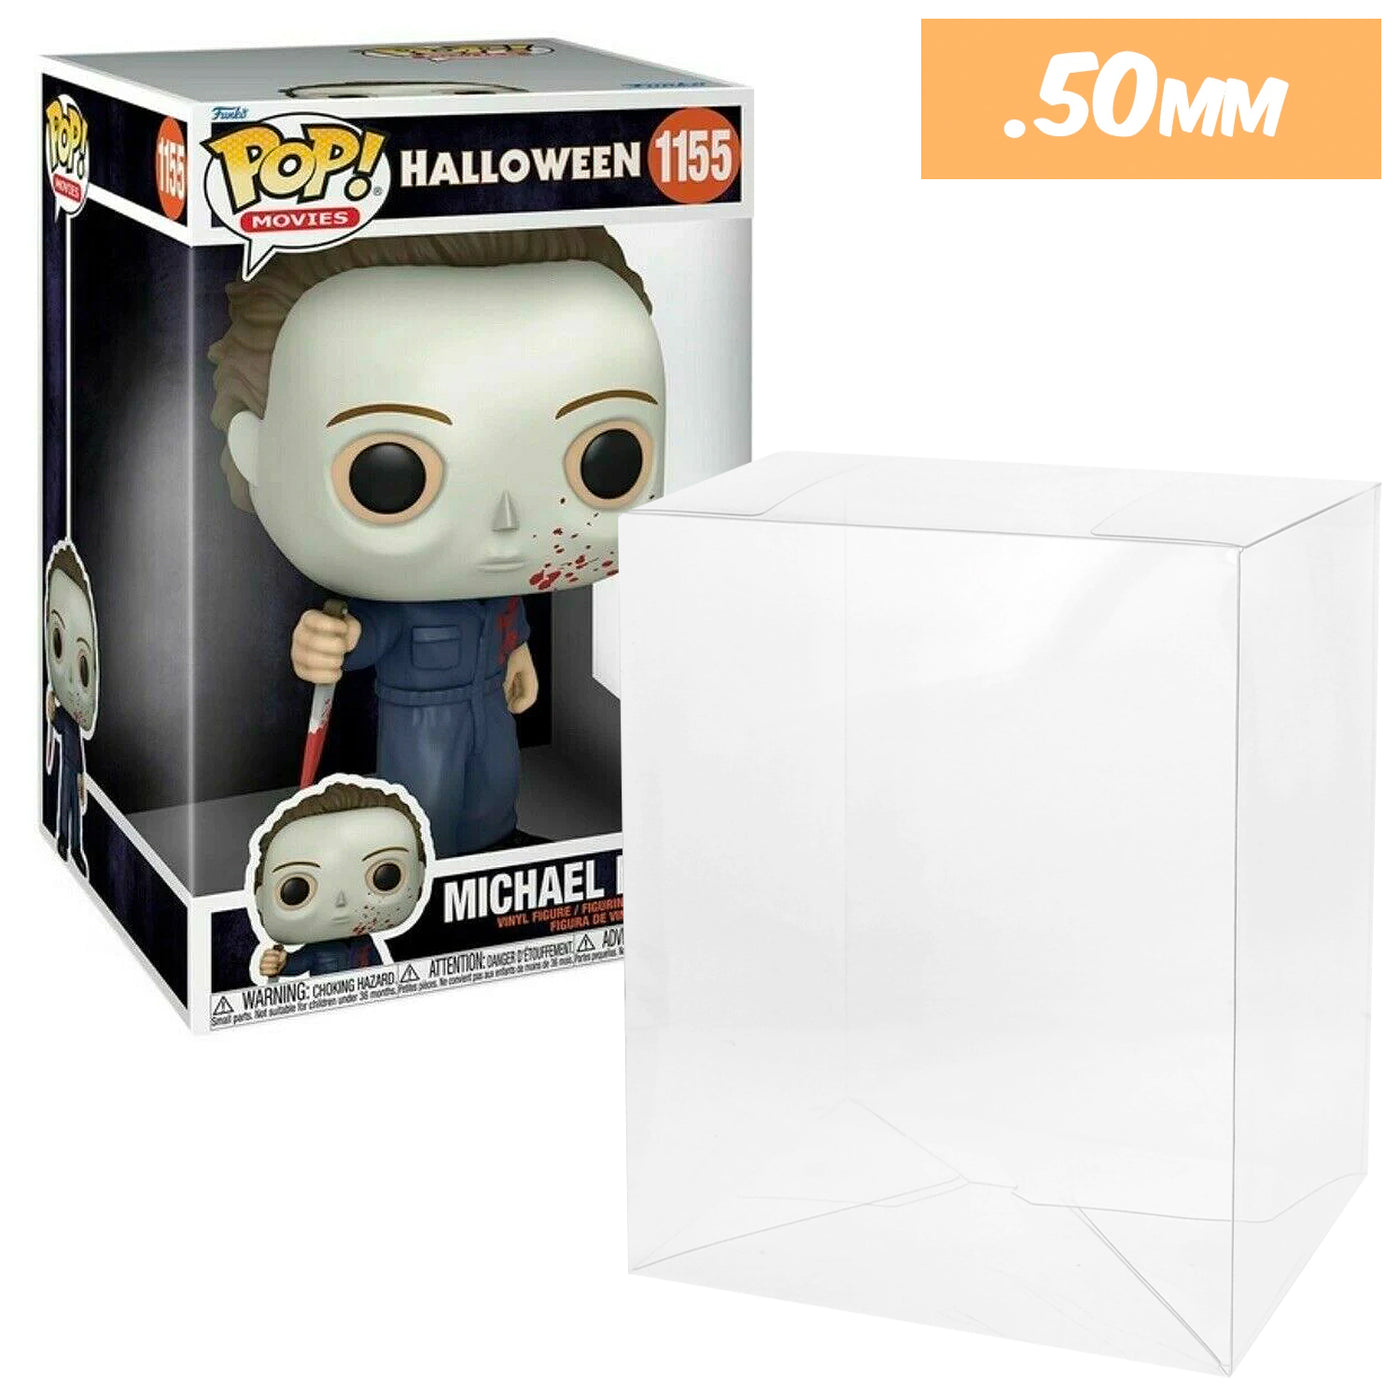 10 inch new size halloween michael myers best funko pop protectors thick strong uv scratch flat top stack vinyl display geek plastic shield vaulted eco armor fits collect protect display case kollector protector